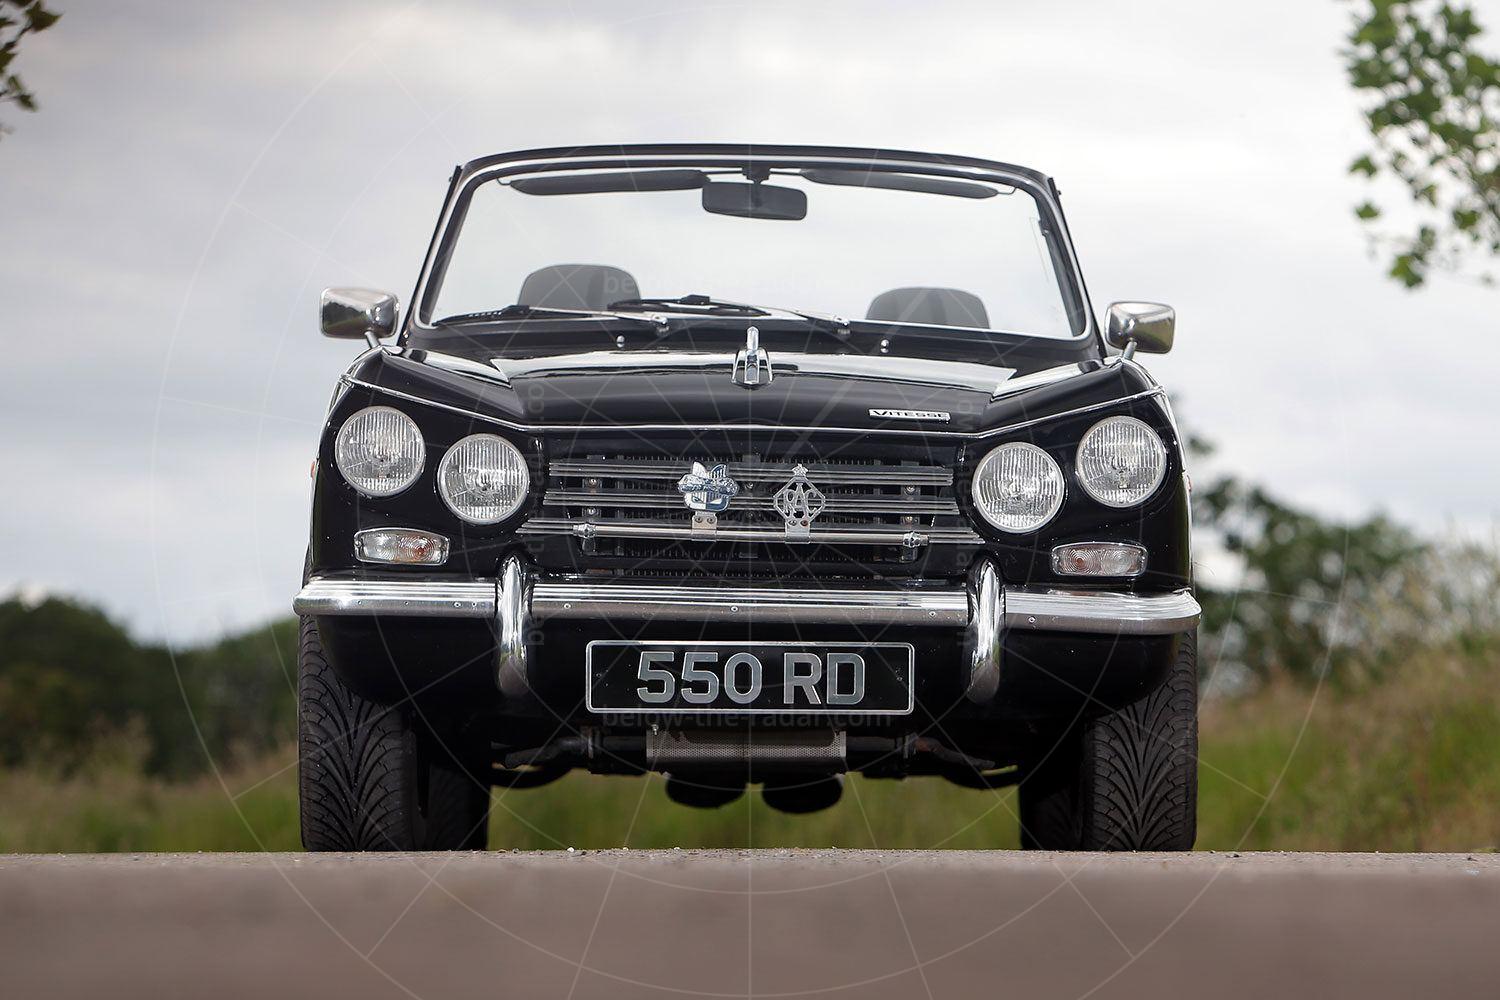 The registration was changed in April 2019, exactly 50 years after the Vitesse was registered Pic: magiccarpics.co.uk | The registration was changed in April 2019, exactly 50 years after the Vitesse was registered